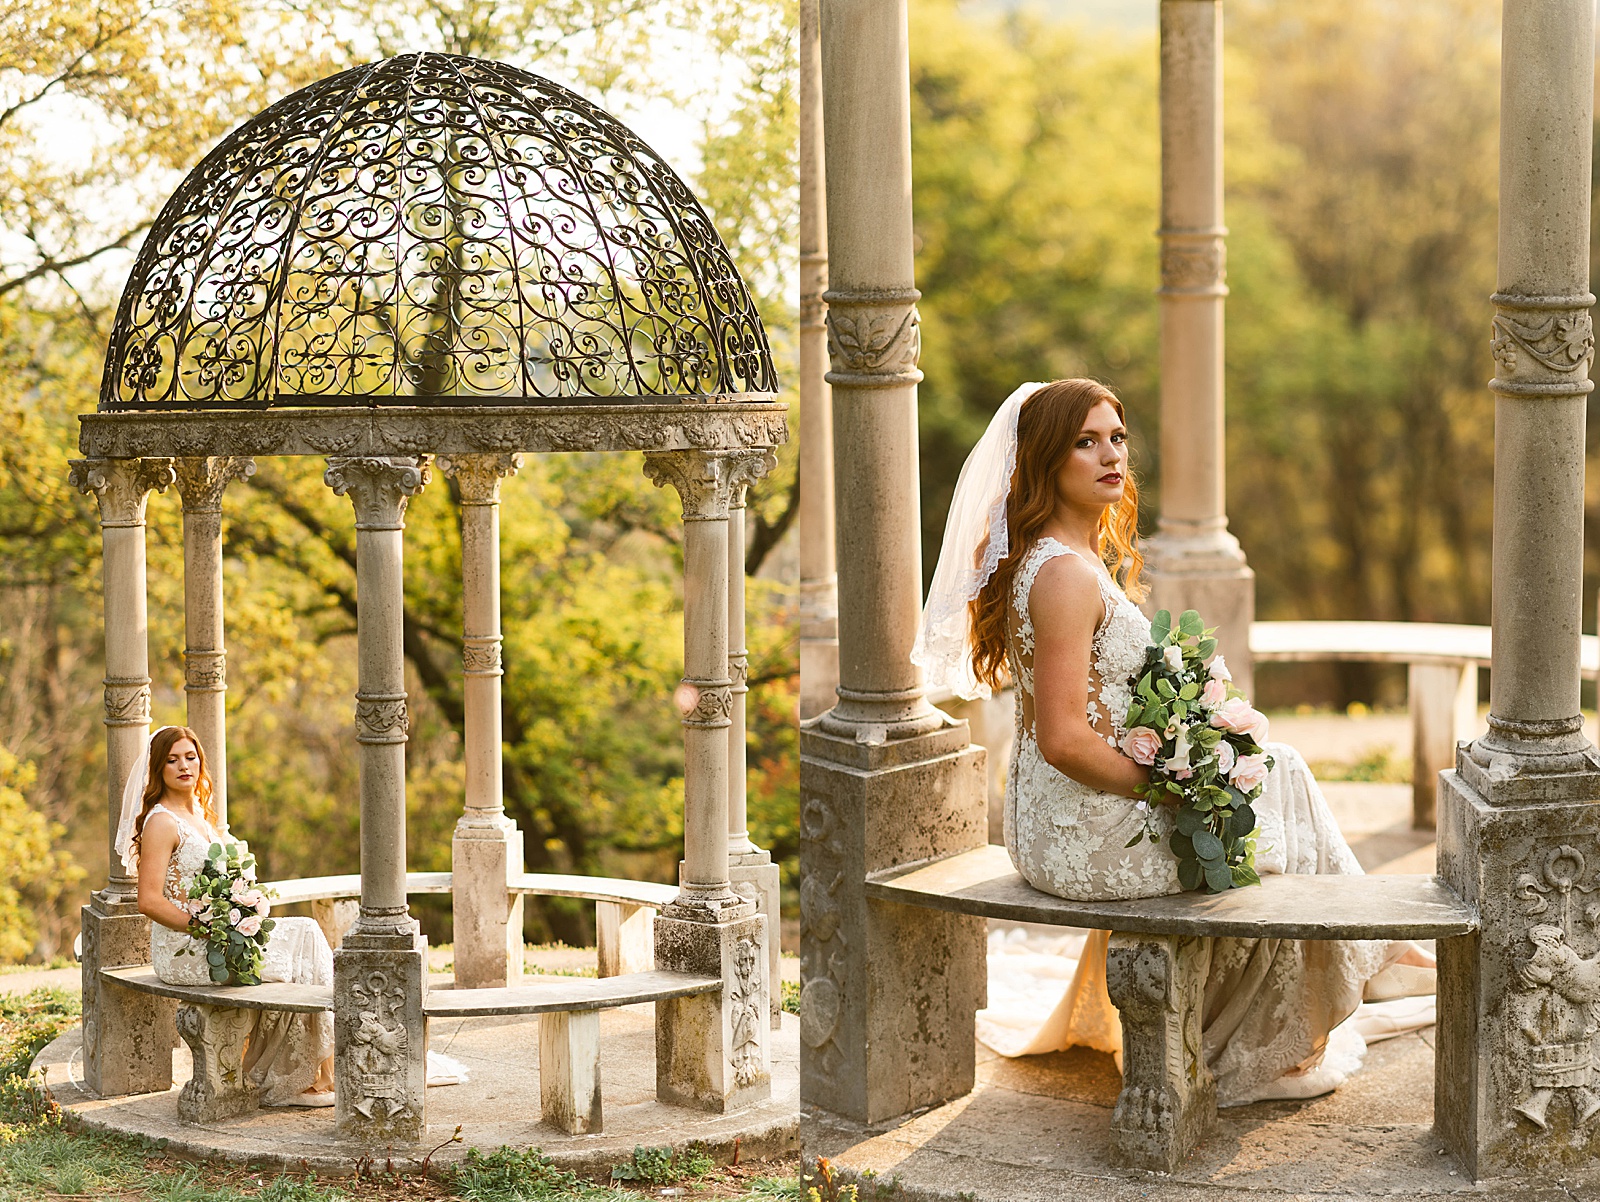 Woman in lace gown sitting in gazebo by Richmond Elopement Photographer